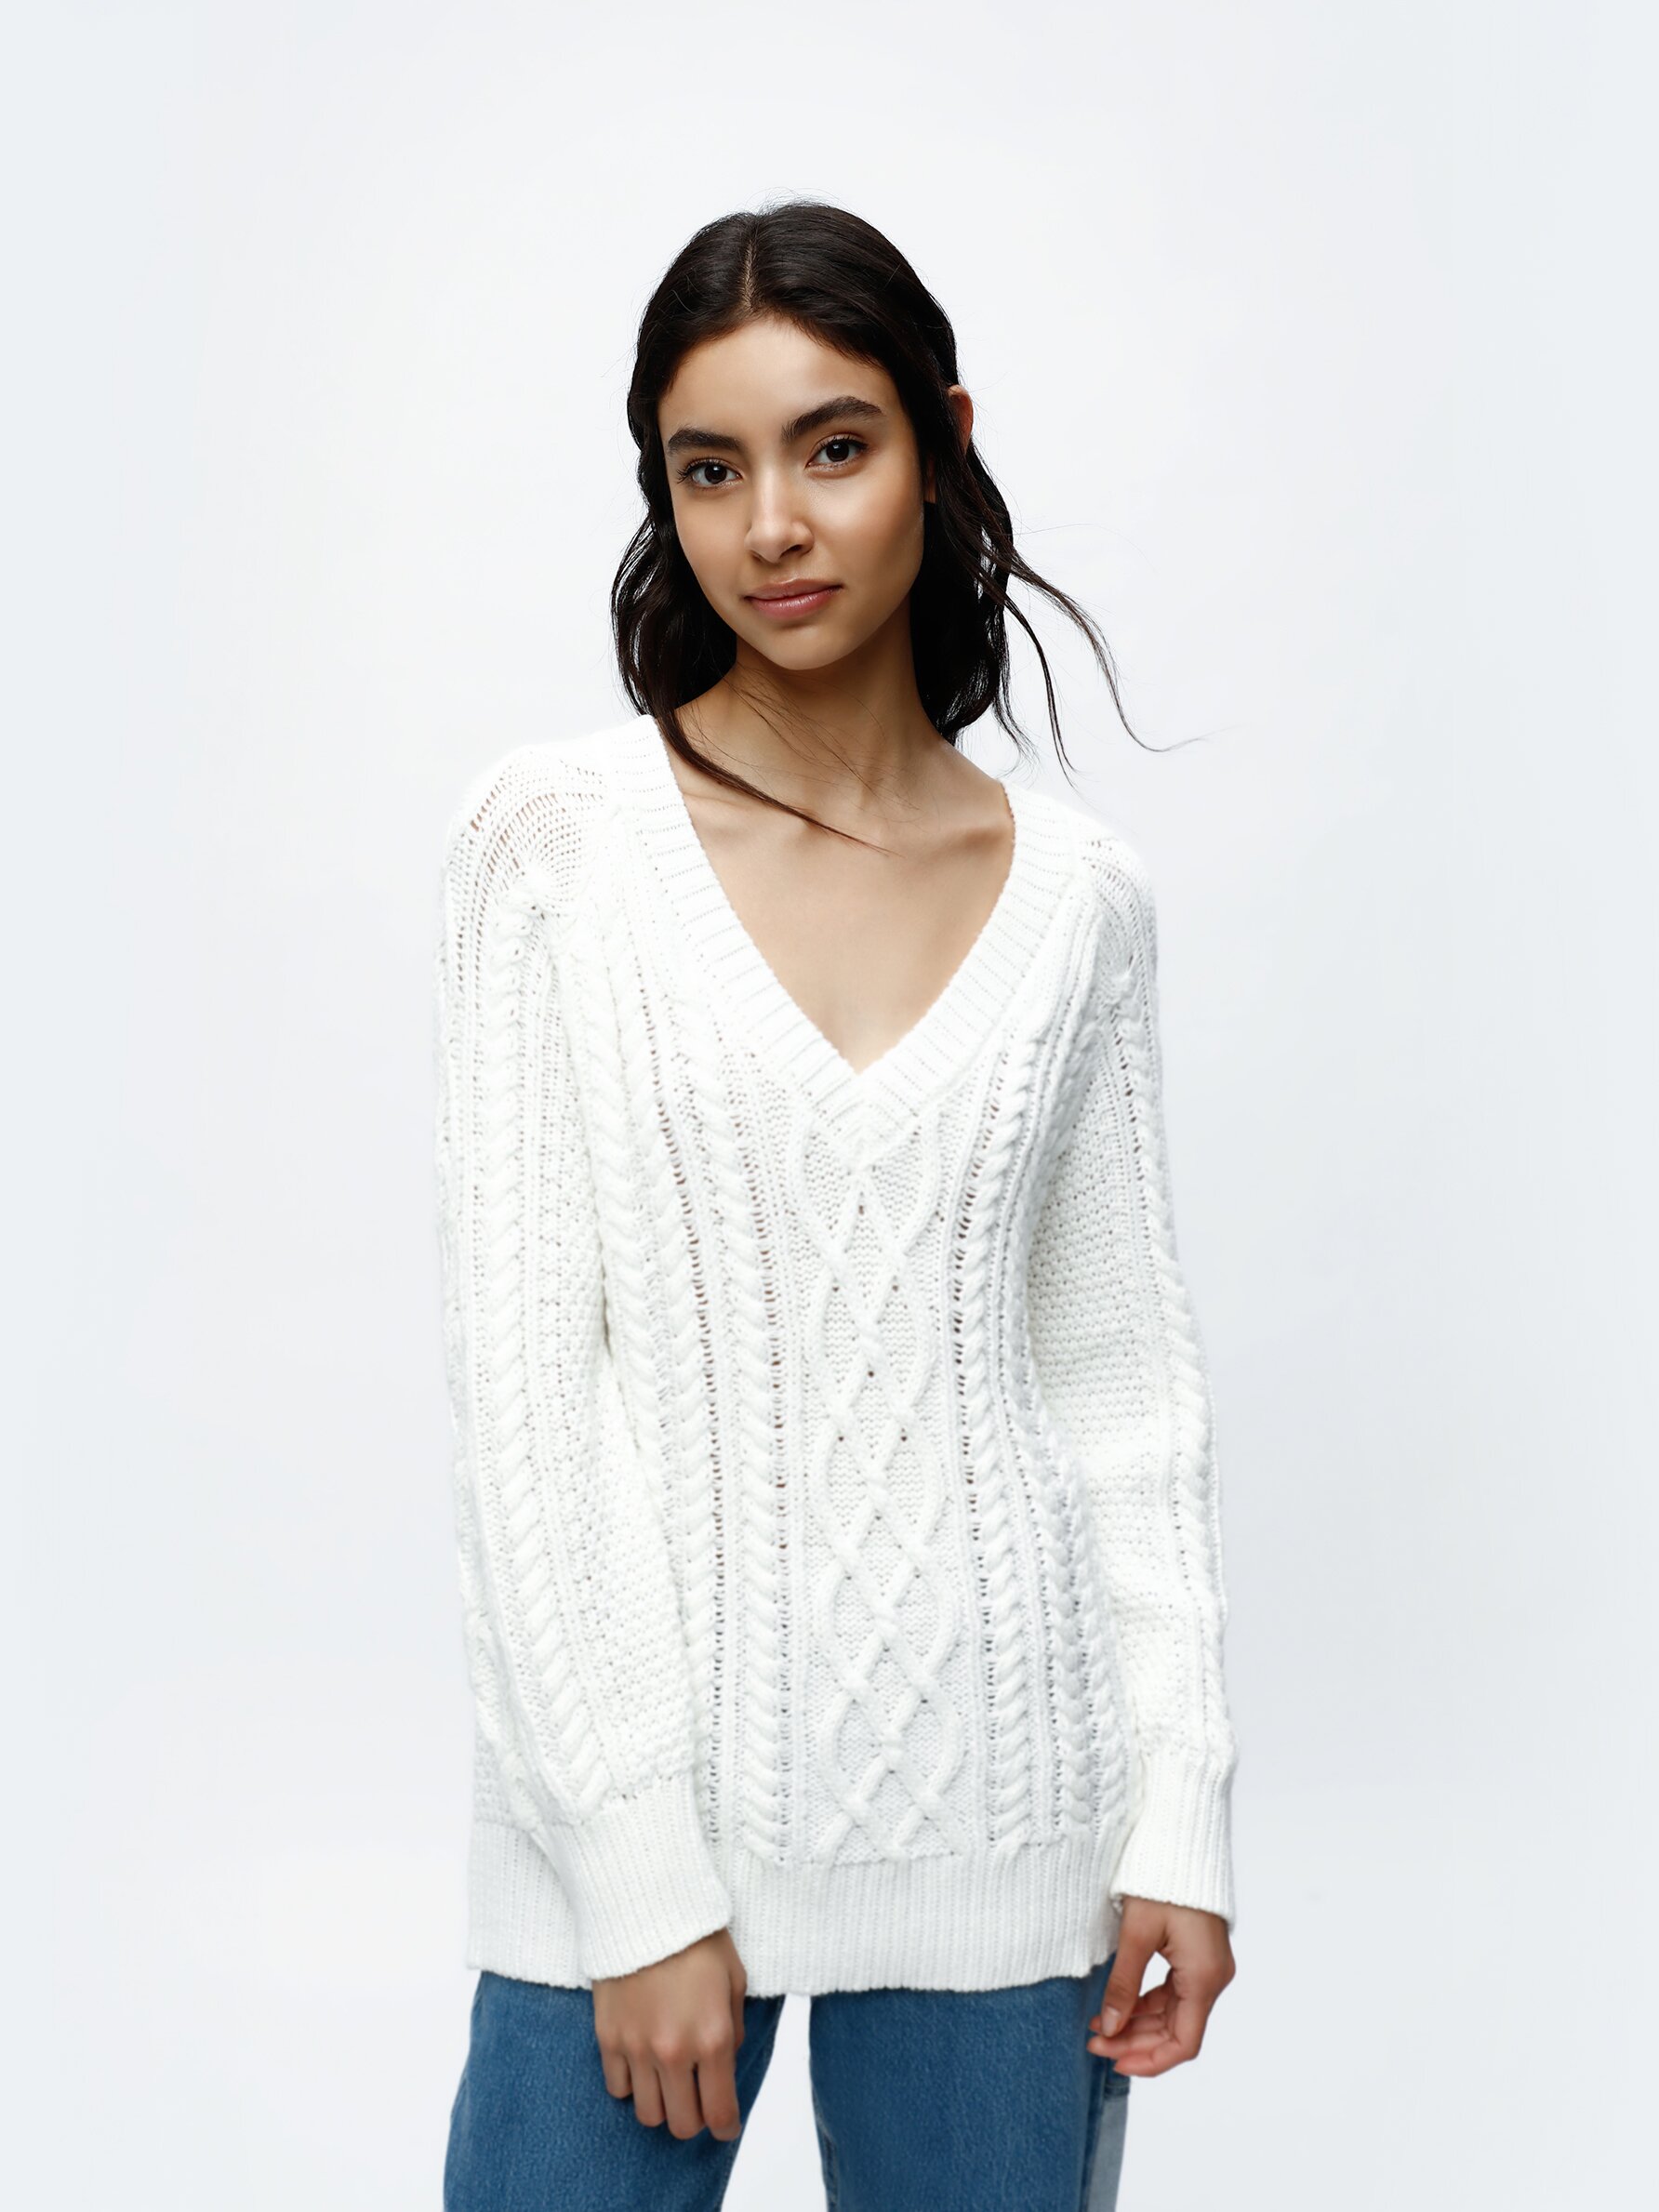 Cable knit sweater - Knit - CLOTHING - Woman 